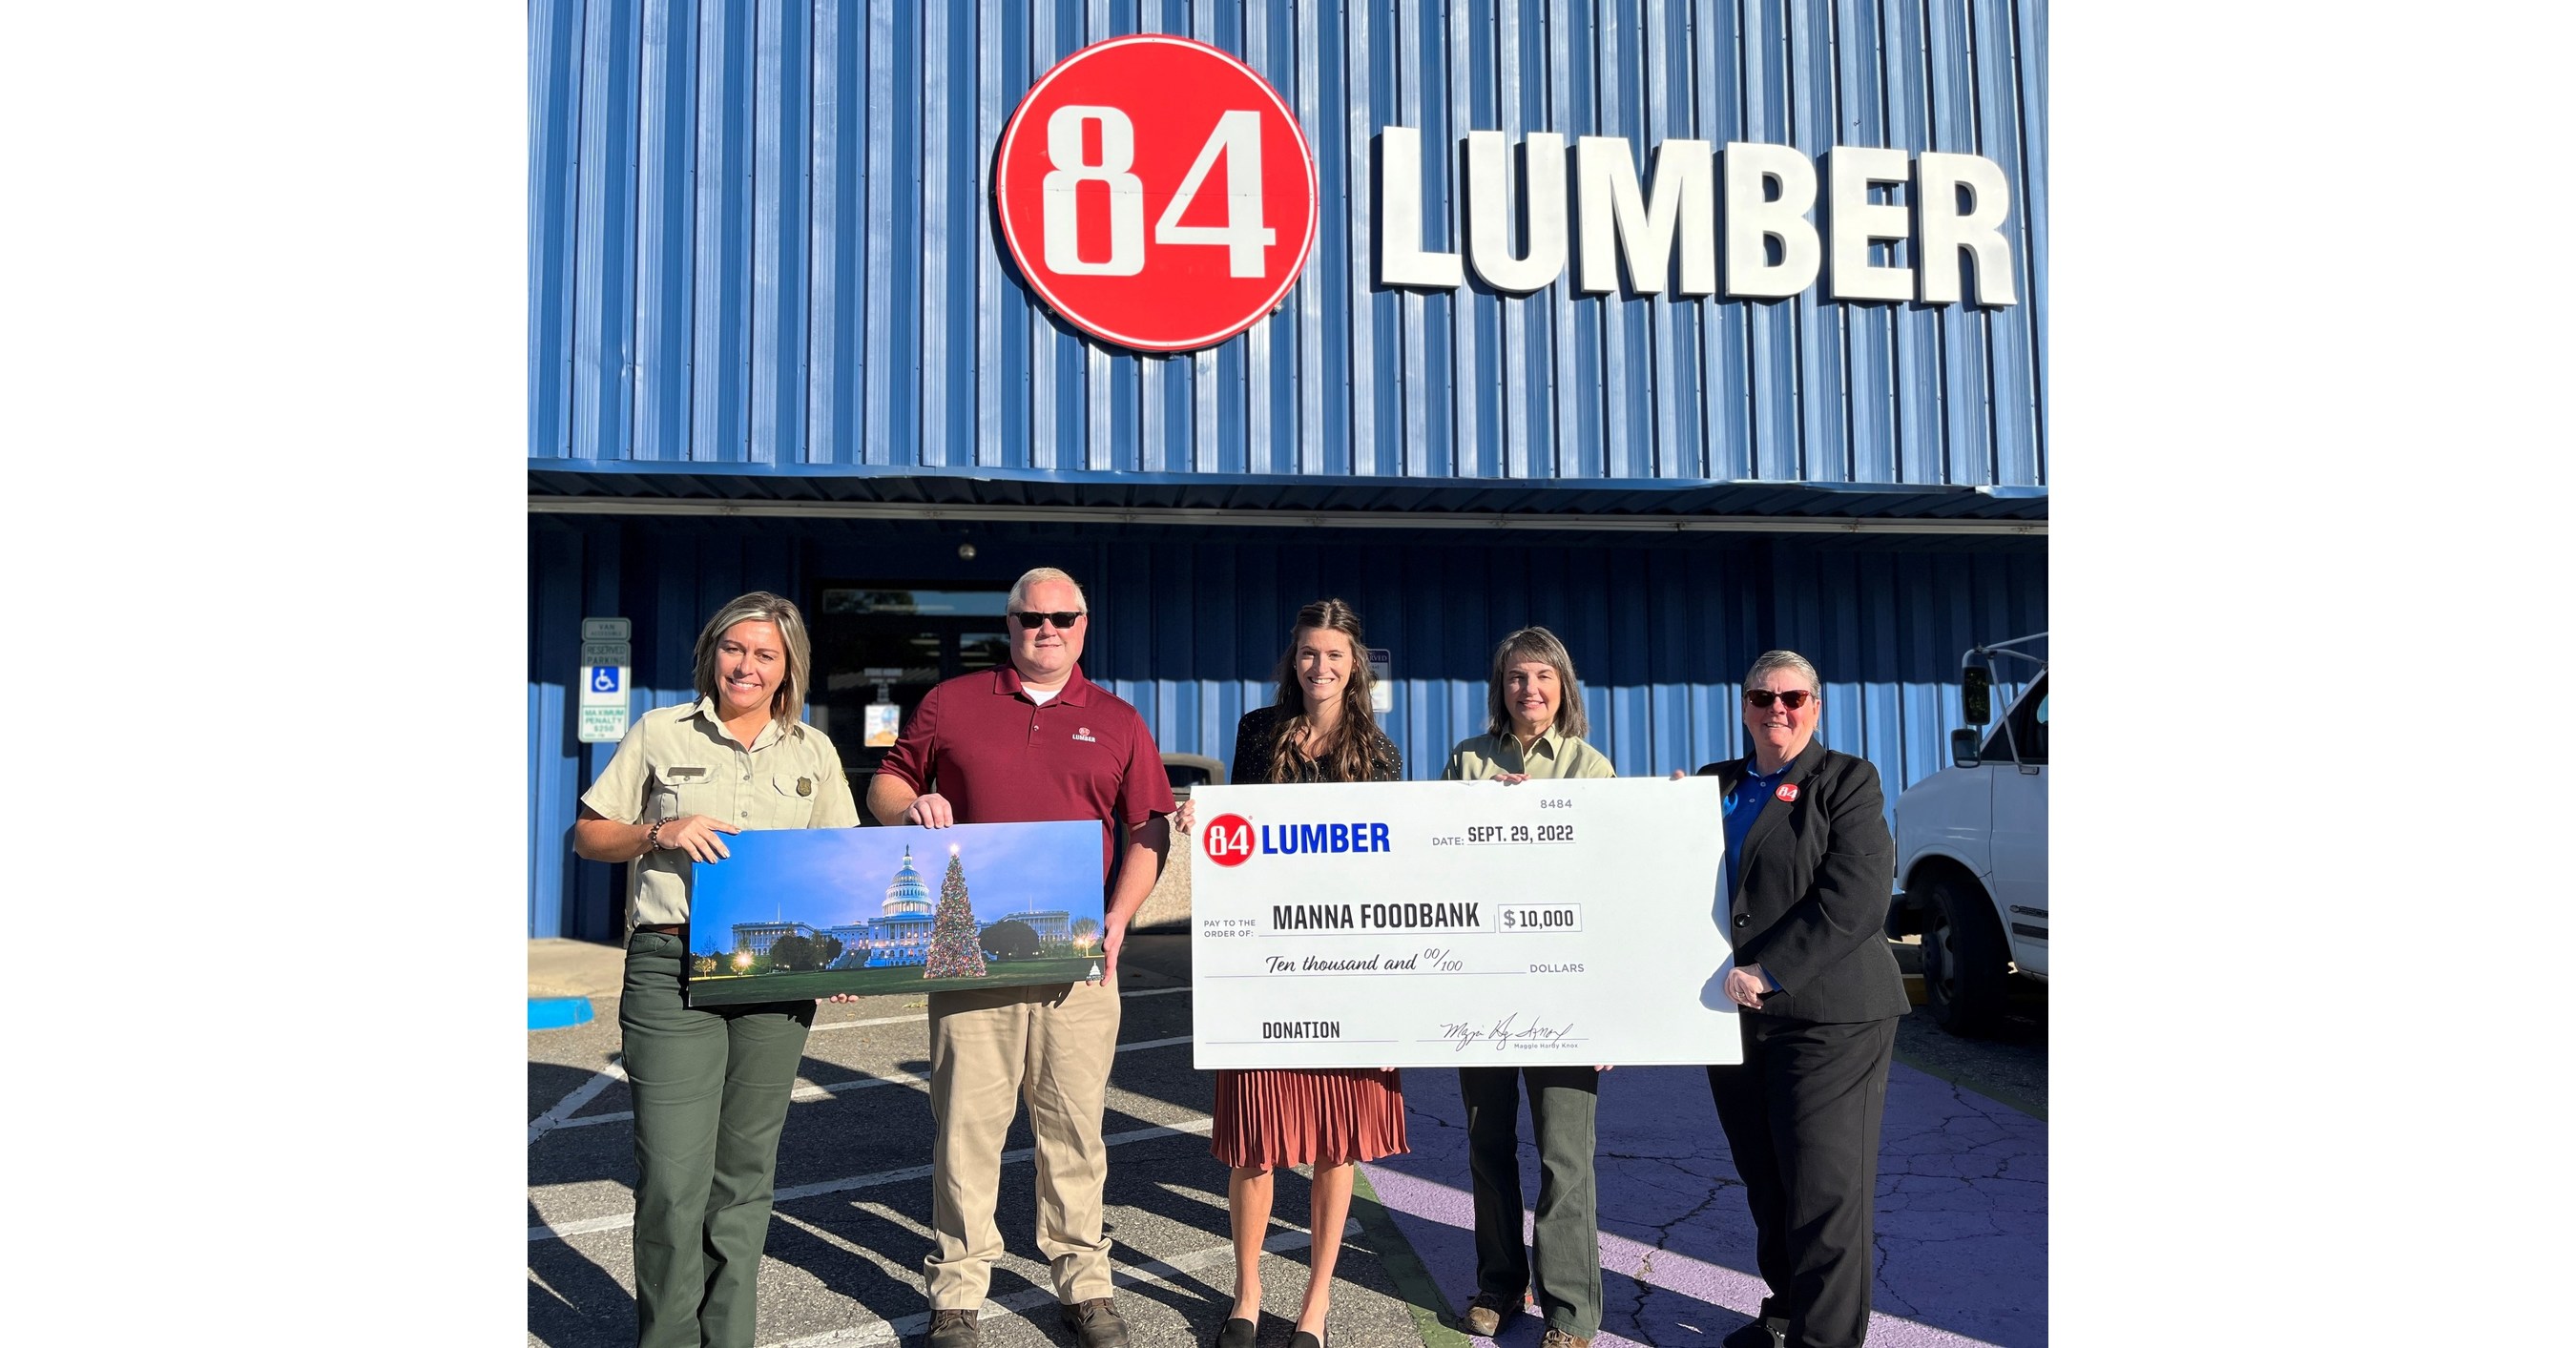  84 Lumber Donates $10,000 to MANNA FoodBank in Asheville, NC 